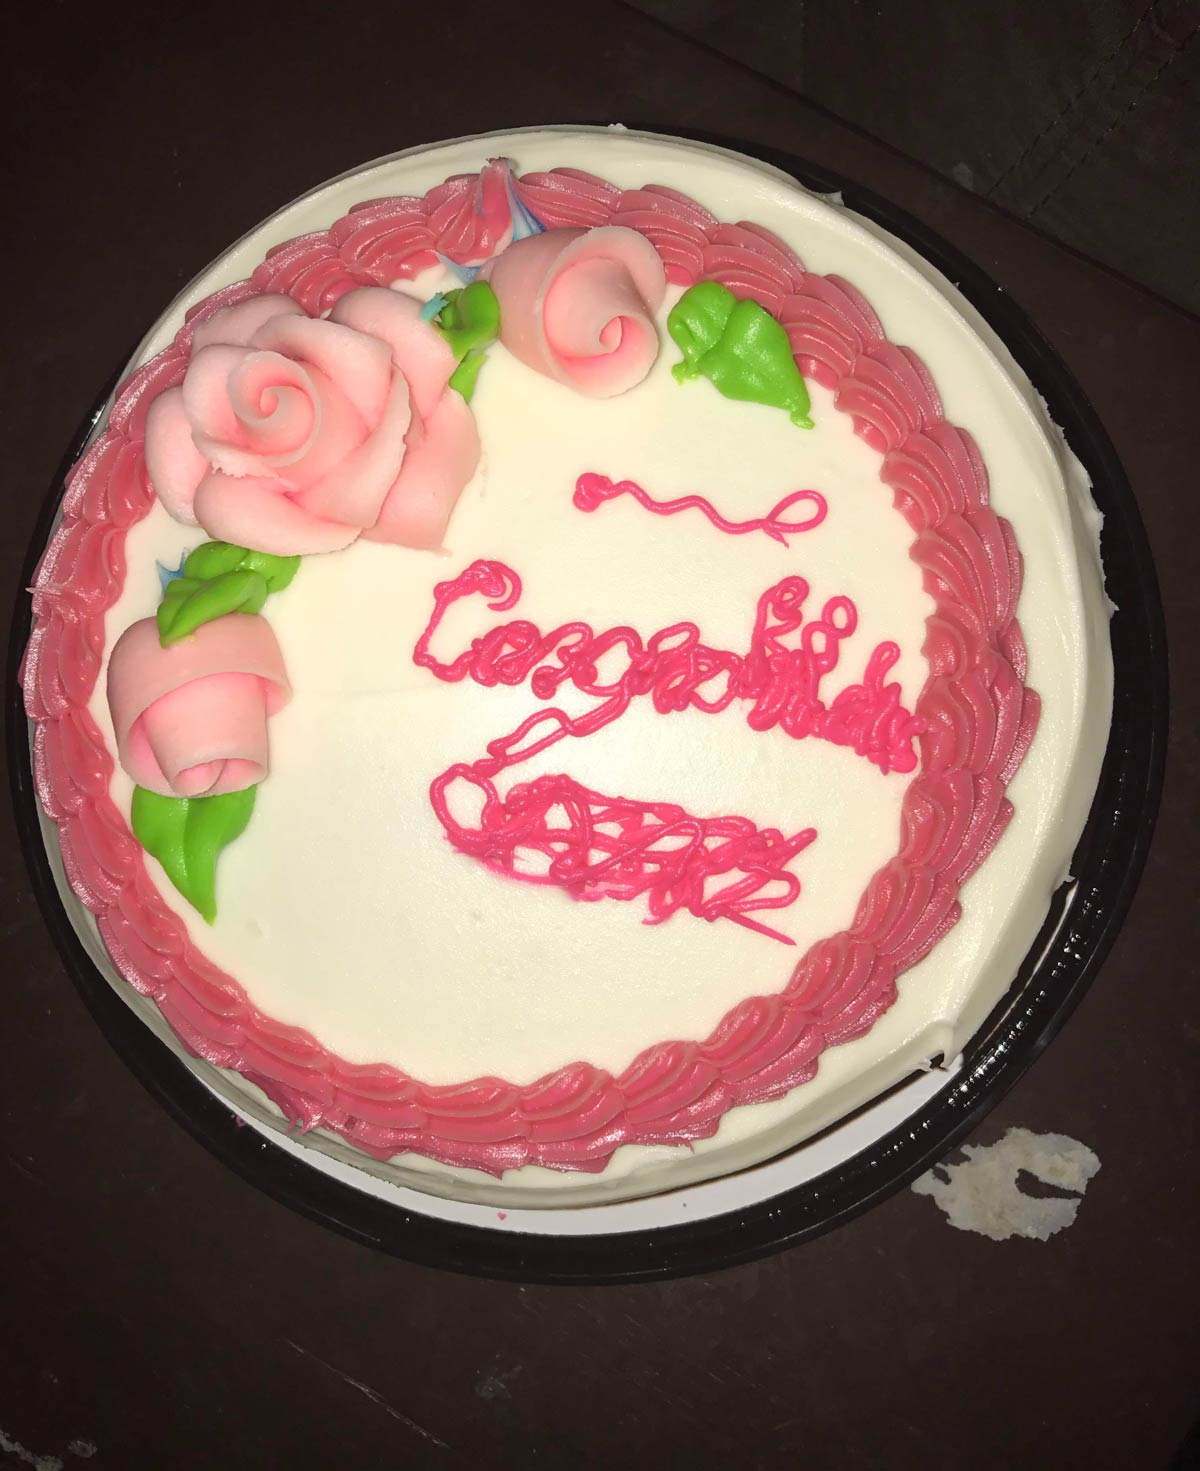 It was supposed to say “Congratulations”. The person who normally writes on cakes wasn’t around, so another person in the bakery offered to do it. This is what I got